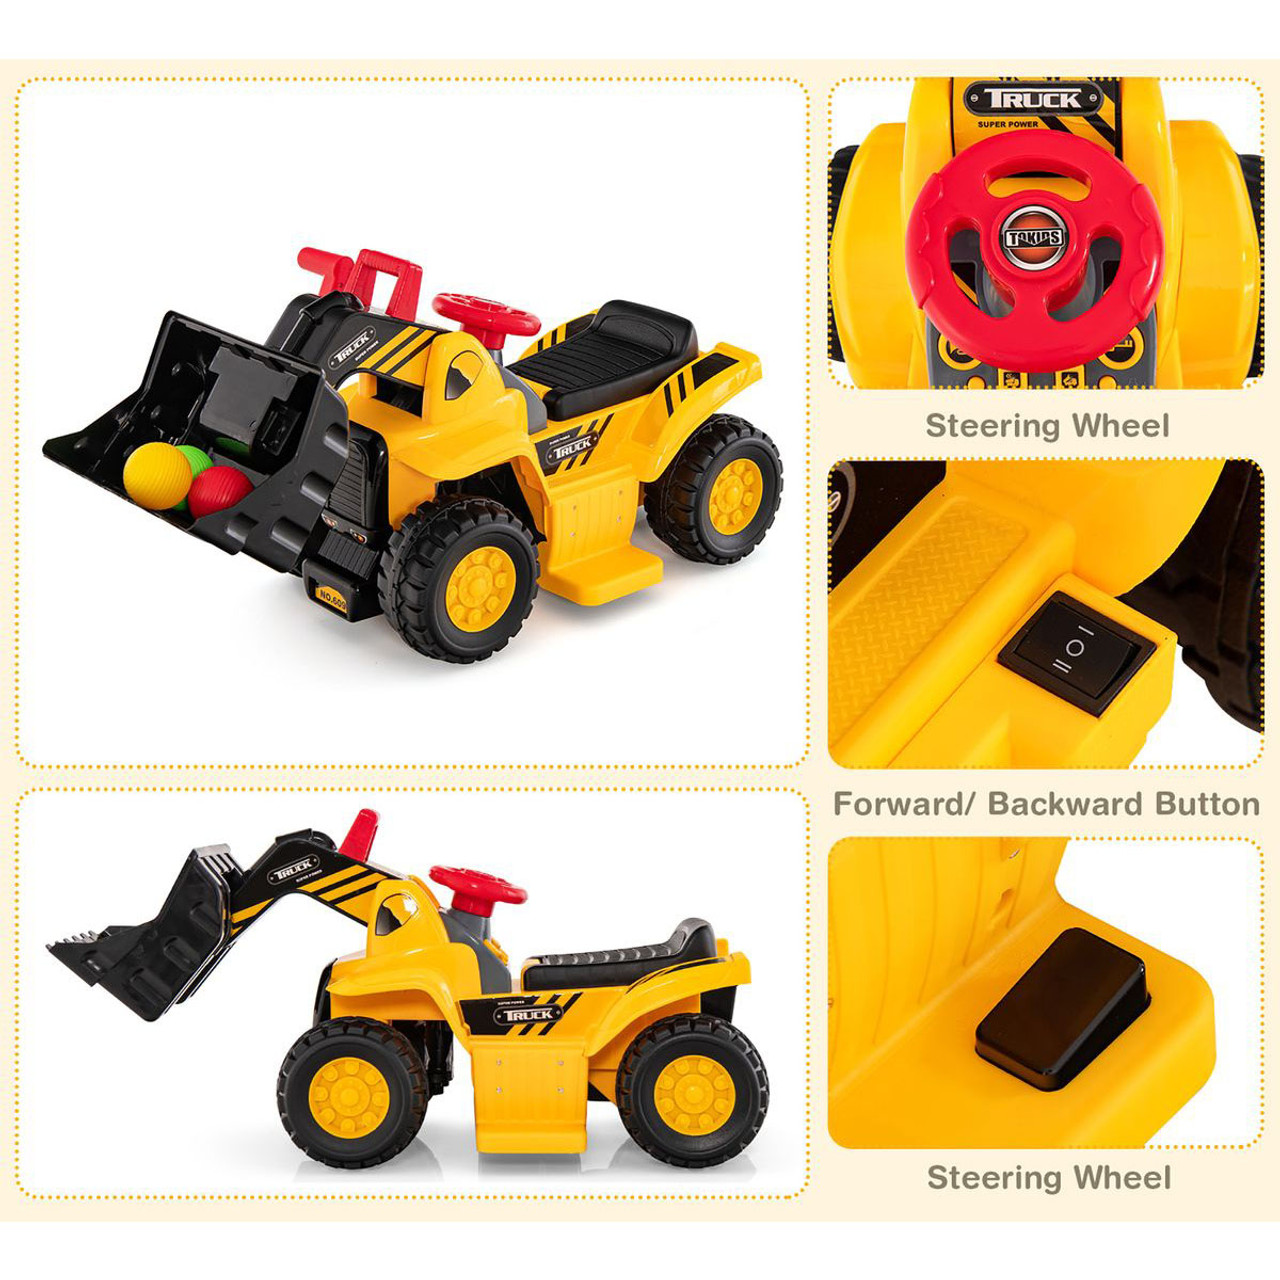 Kids' 6V Electric Ride-on Bulldozer with Adjustable Bucket product image